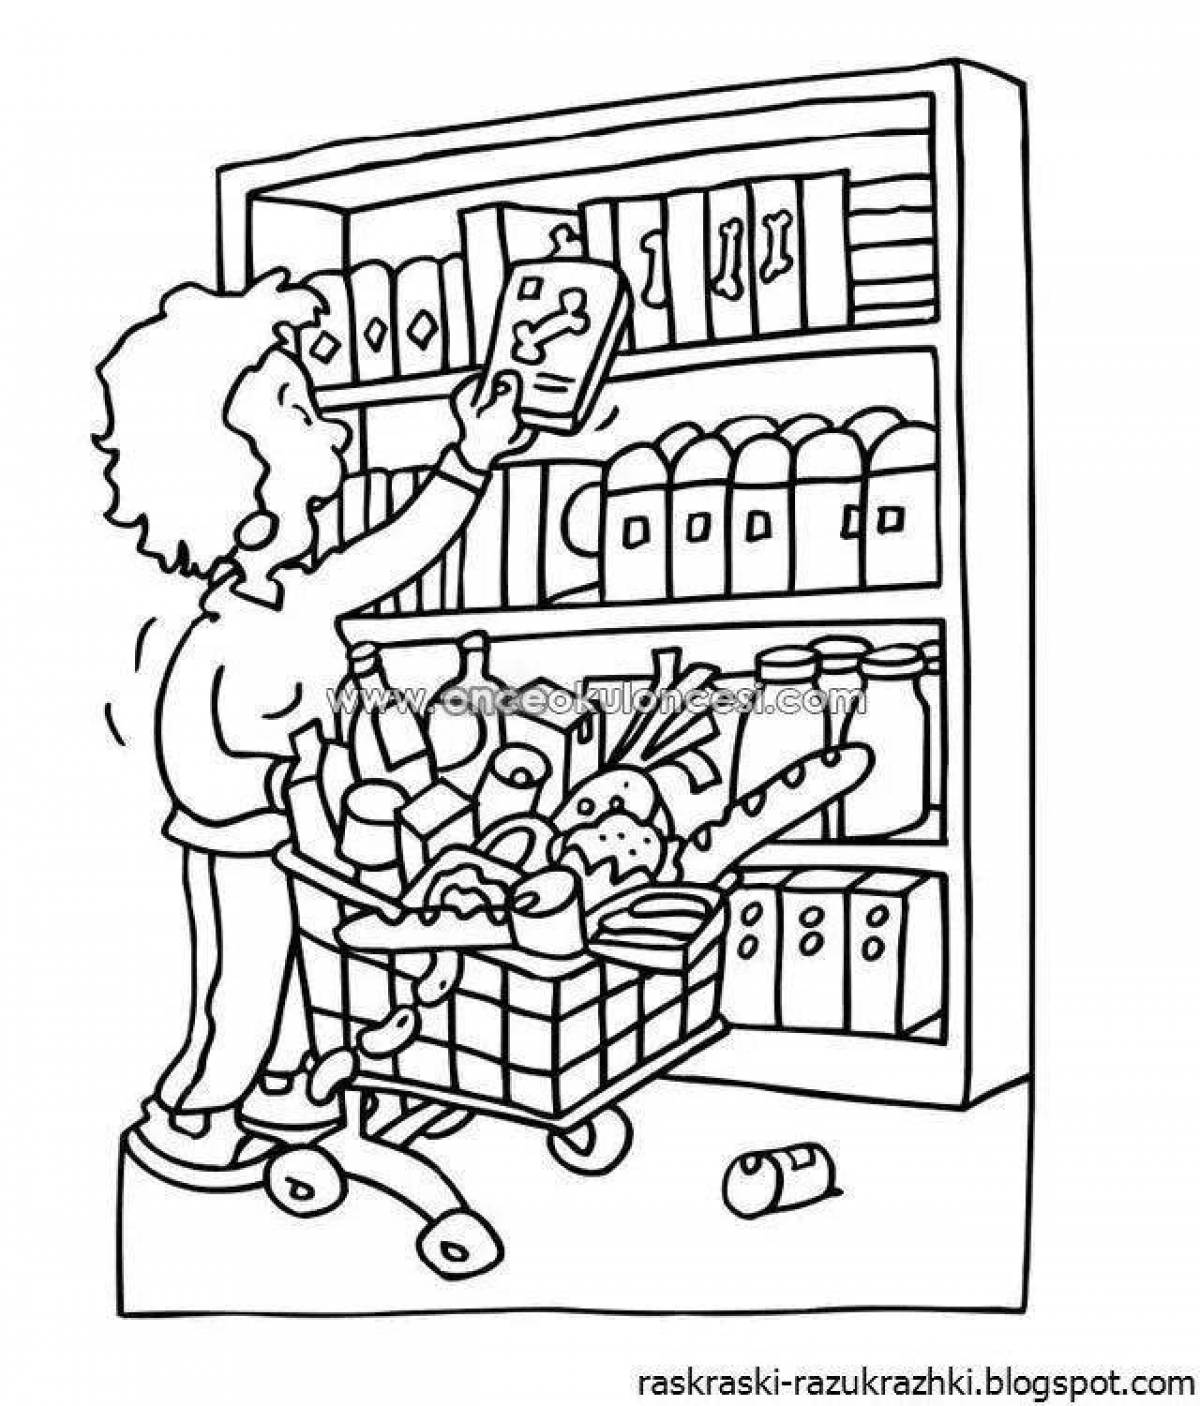 Shop of coloring books for children